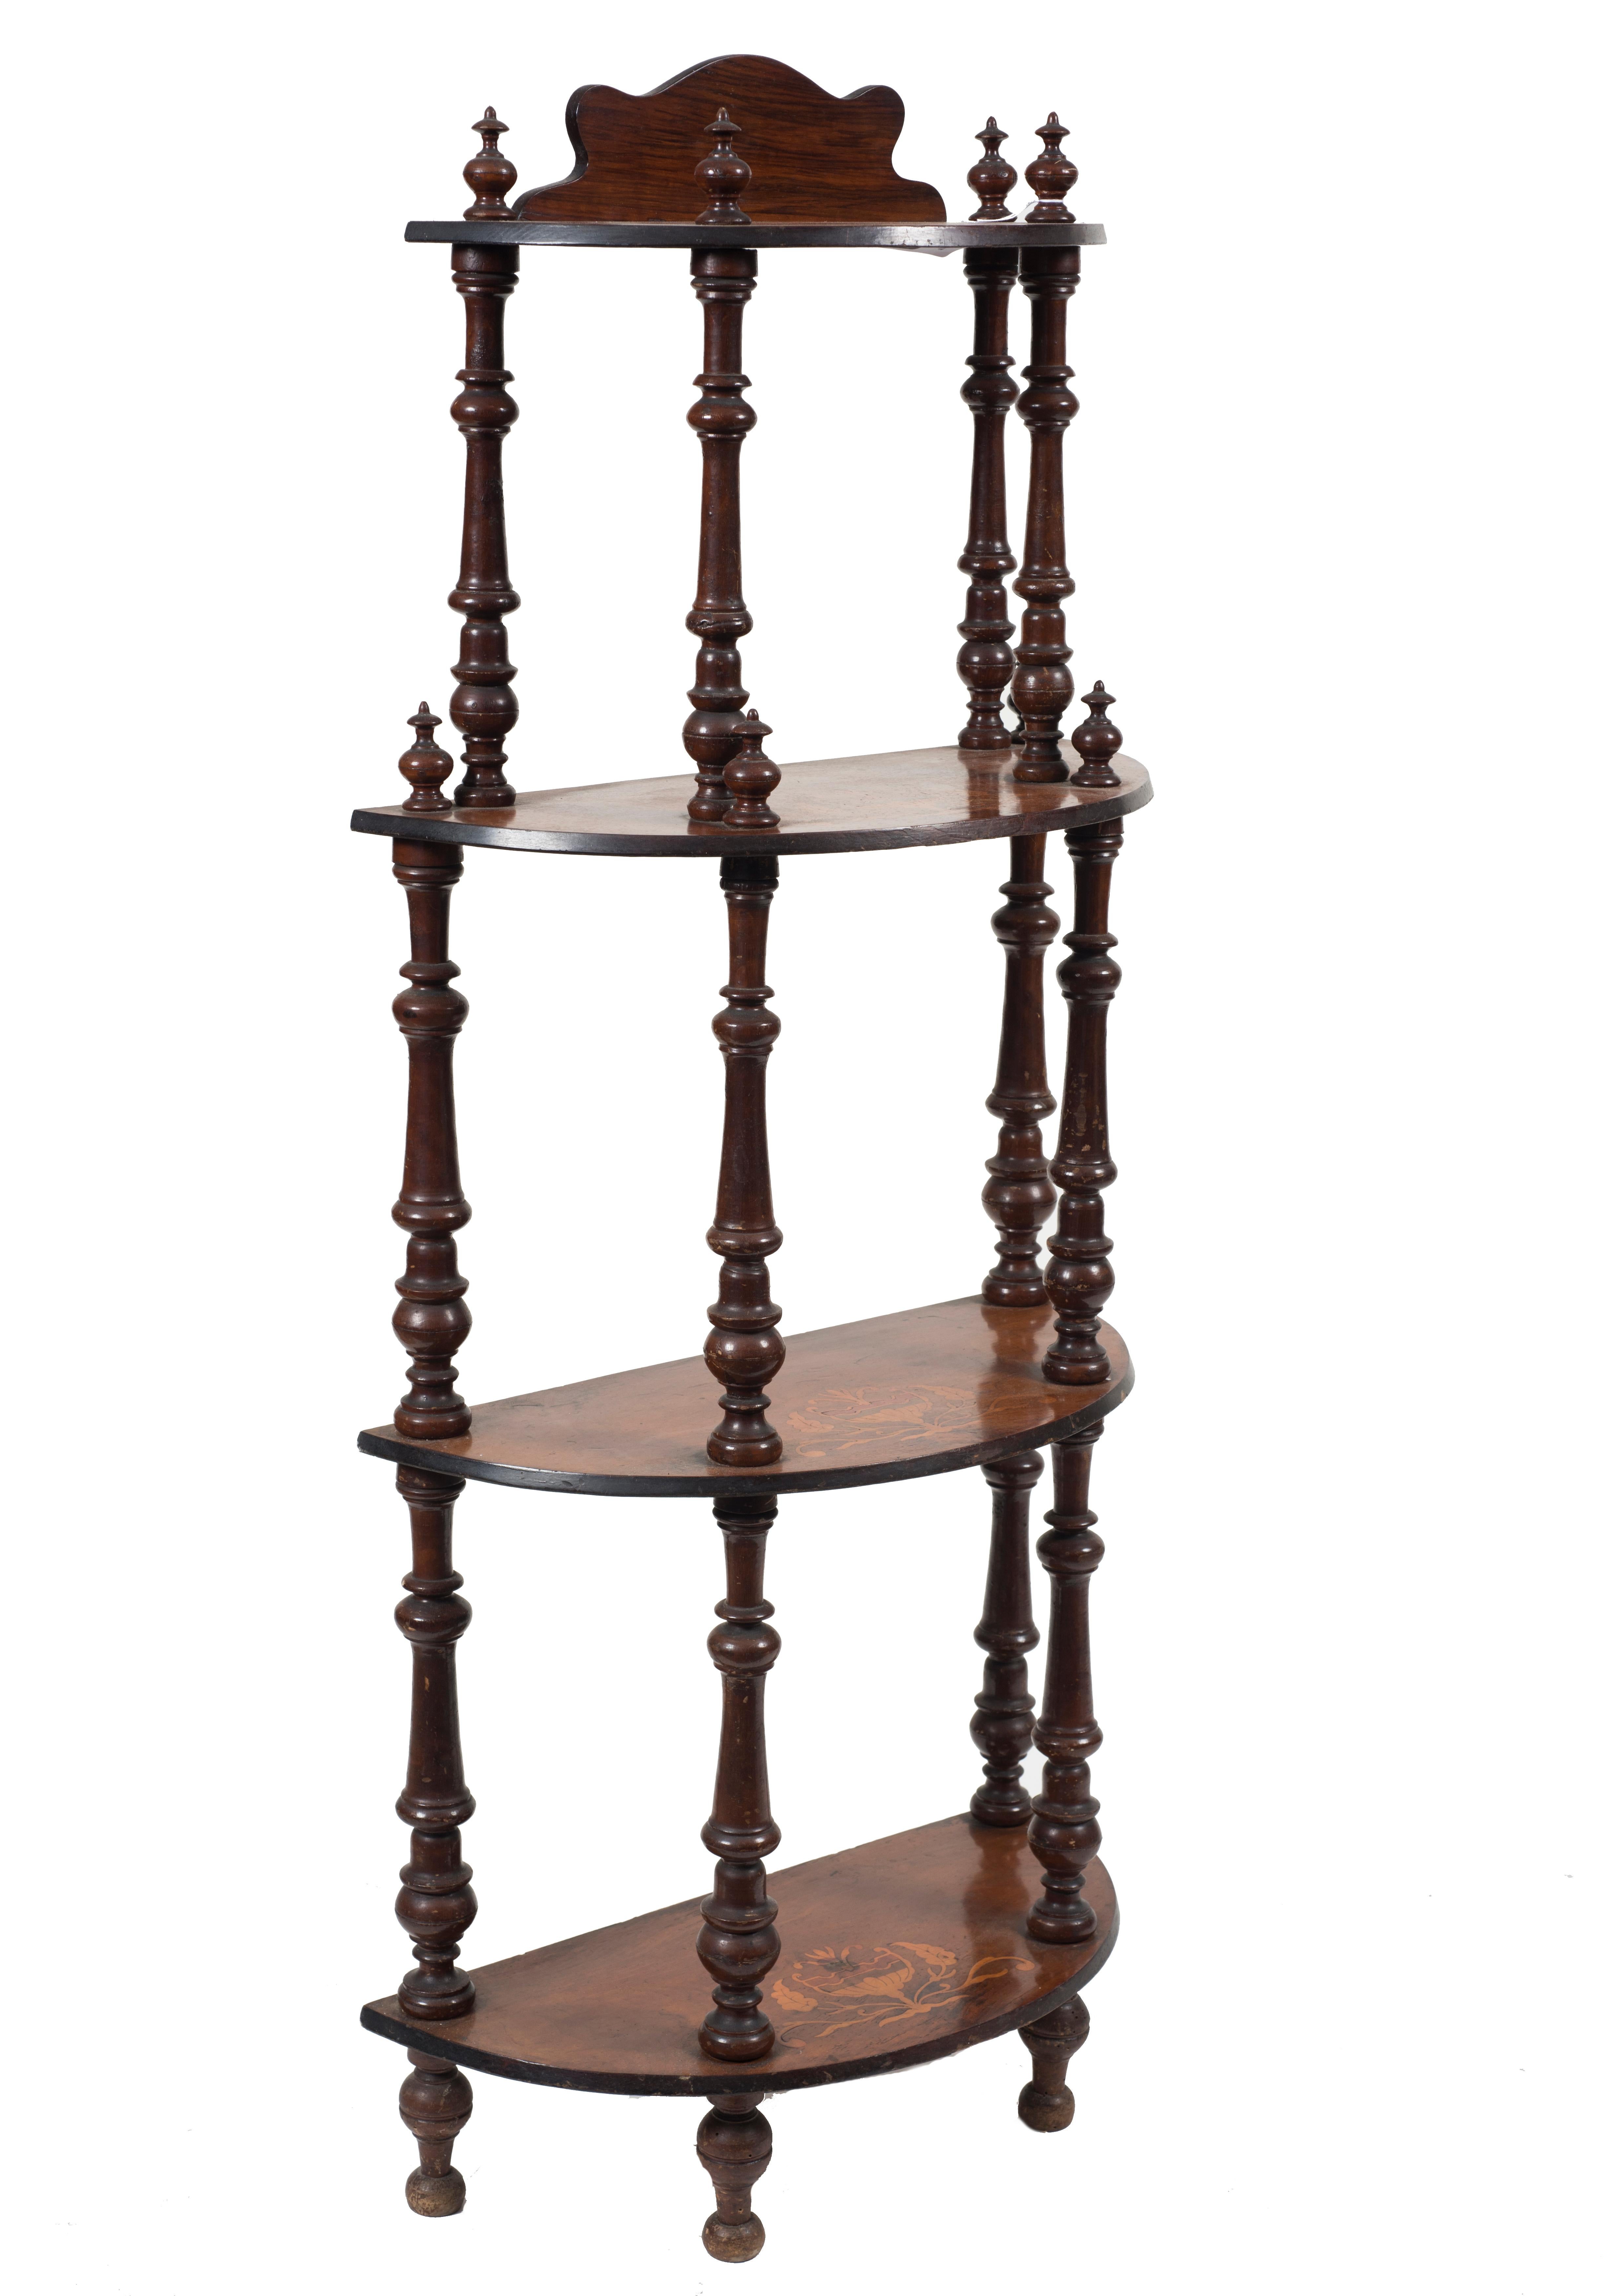 Ancient étagère in veneer walnut and inlaid with light woods, 4 shelves connected with small columns, Italy, 19th century.
Good conditions.

This object is shipped from Italy. Under existing legislation, any object in Italy created over 70 years